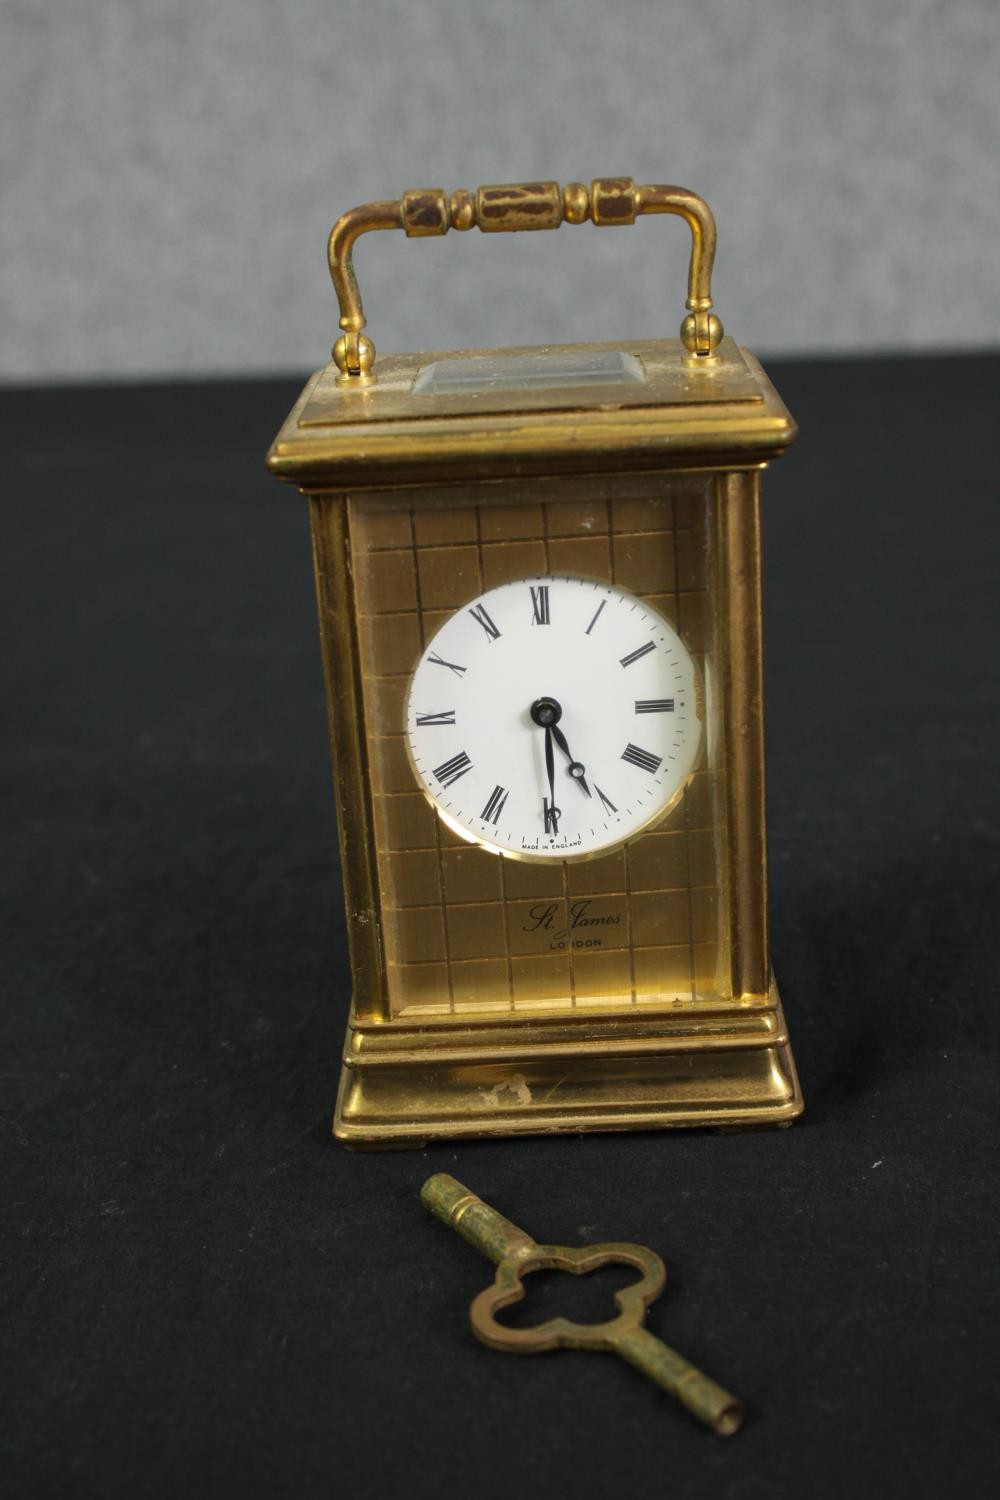 A St James London brass carriage clock with white enamel dial and black roman numerals. With key. - Image 3 of 5